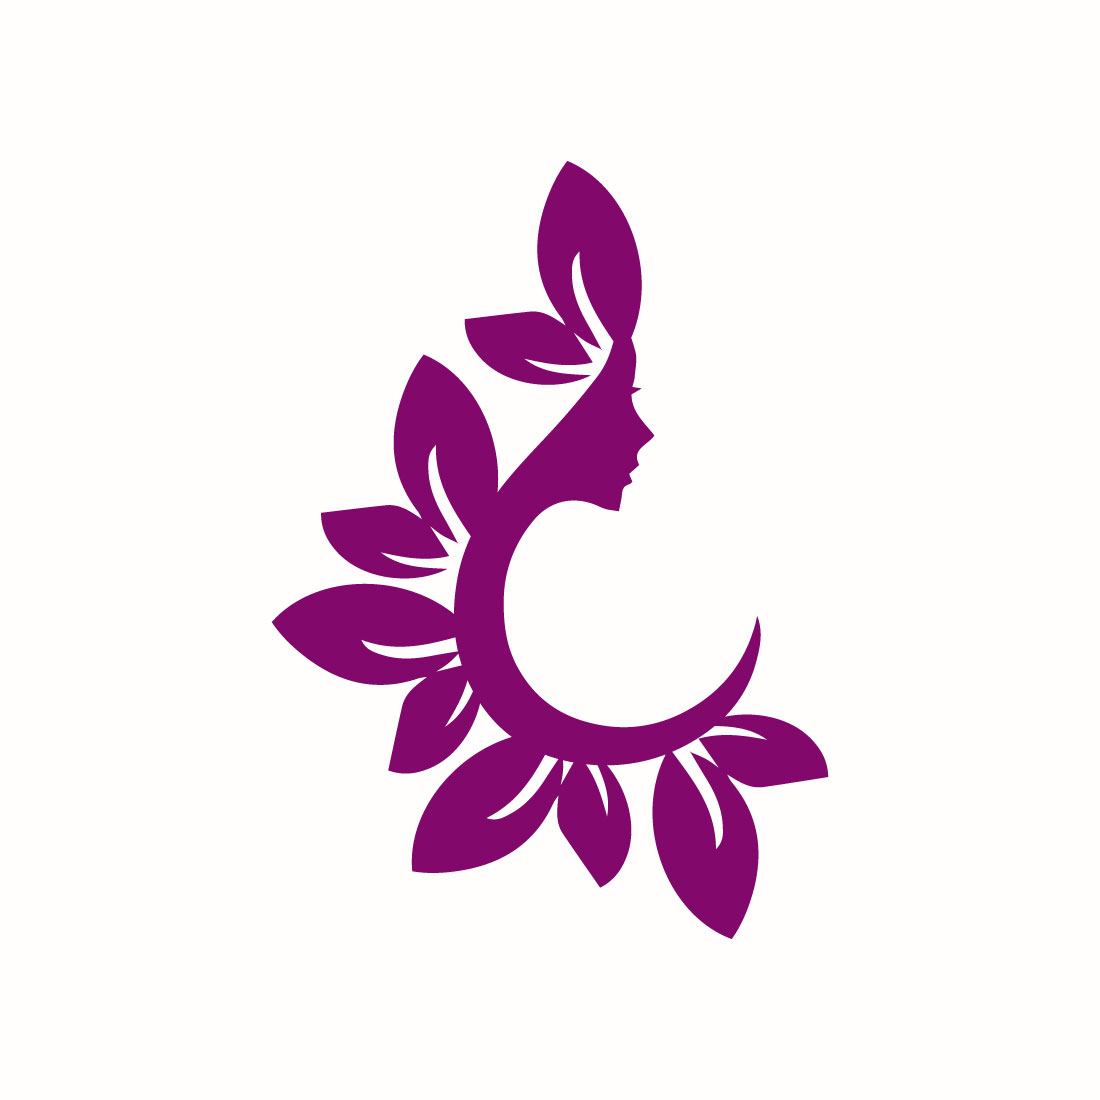 Free Beauty Skin care logo cover image.